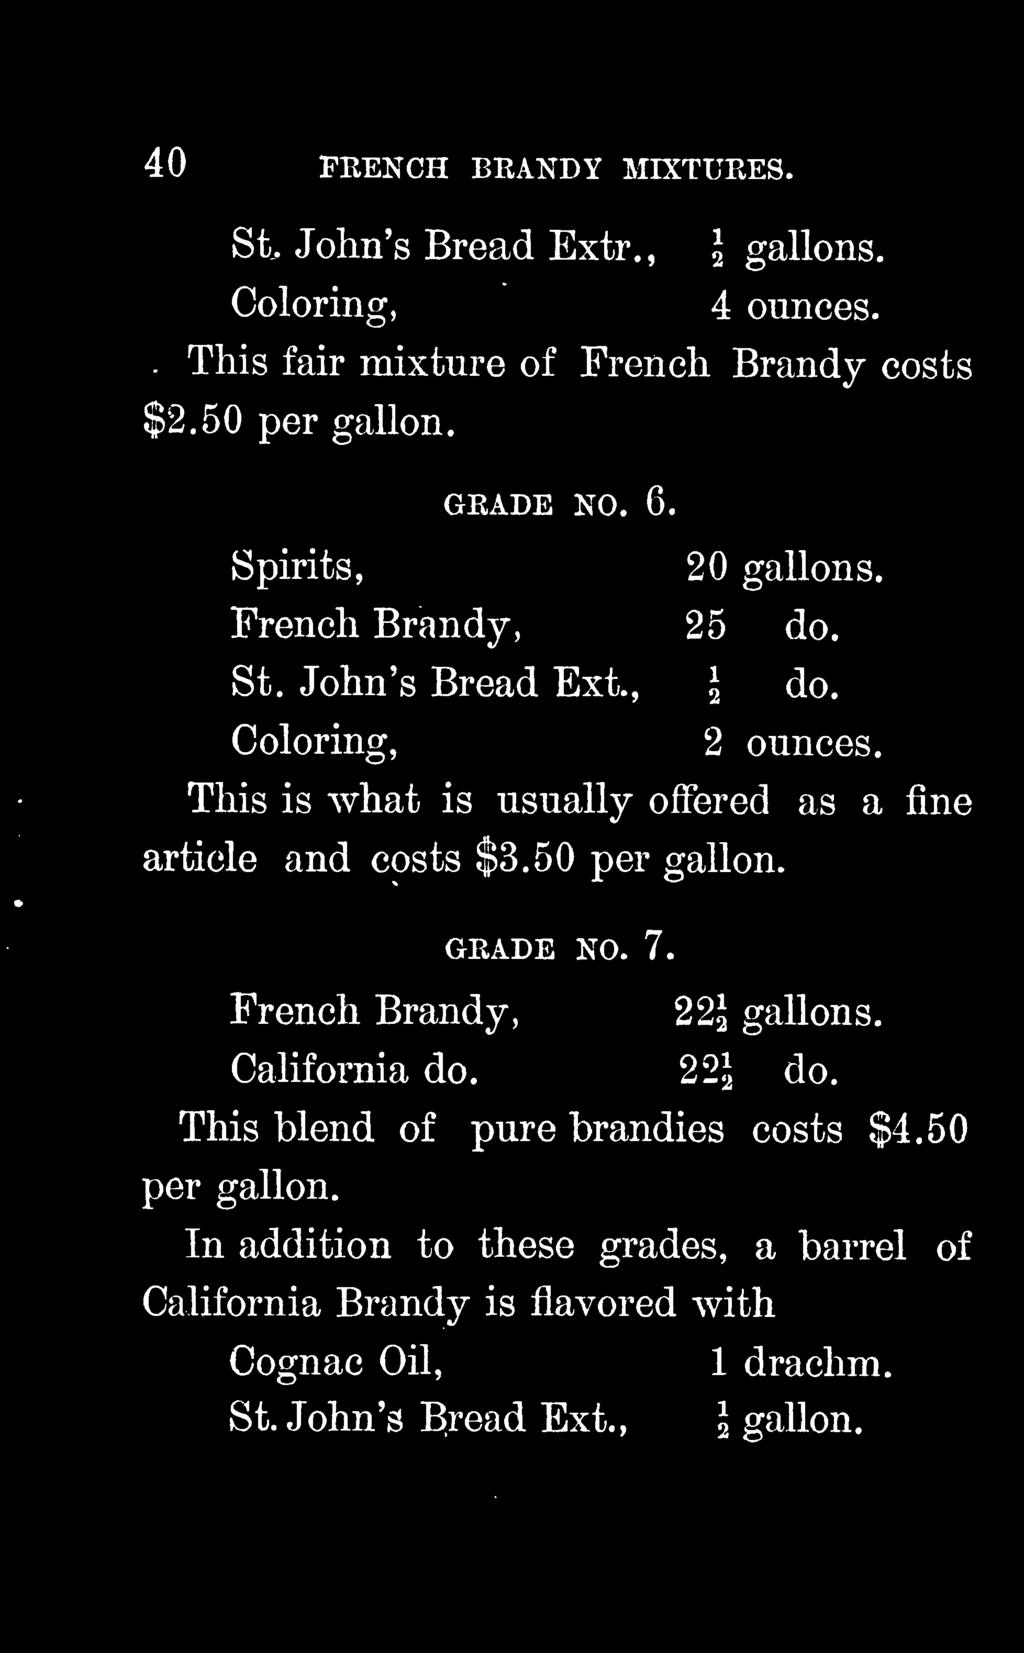 French Brandy, 22J gallons. California do. 22J do. This blend of pure brandies costs $4.